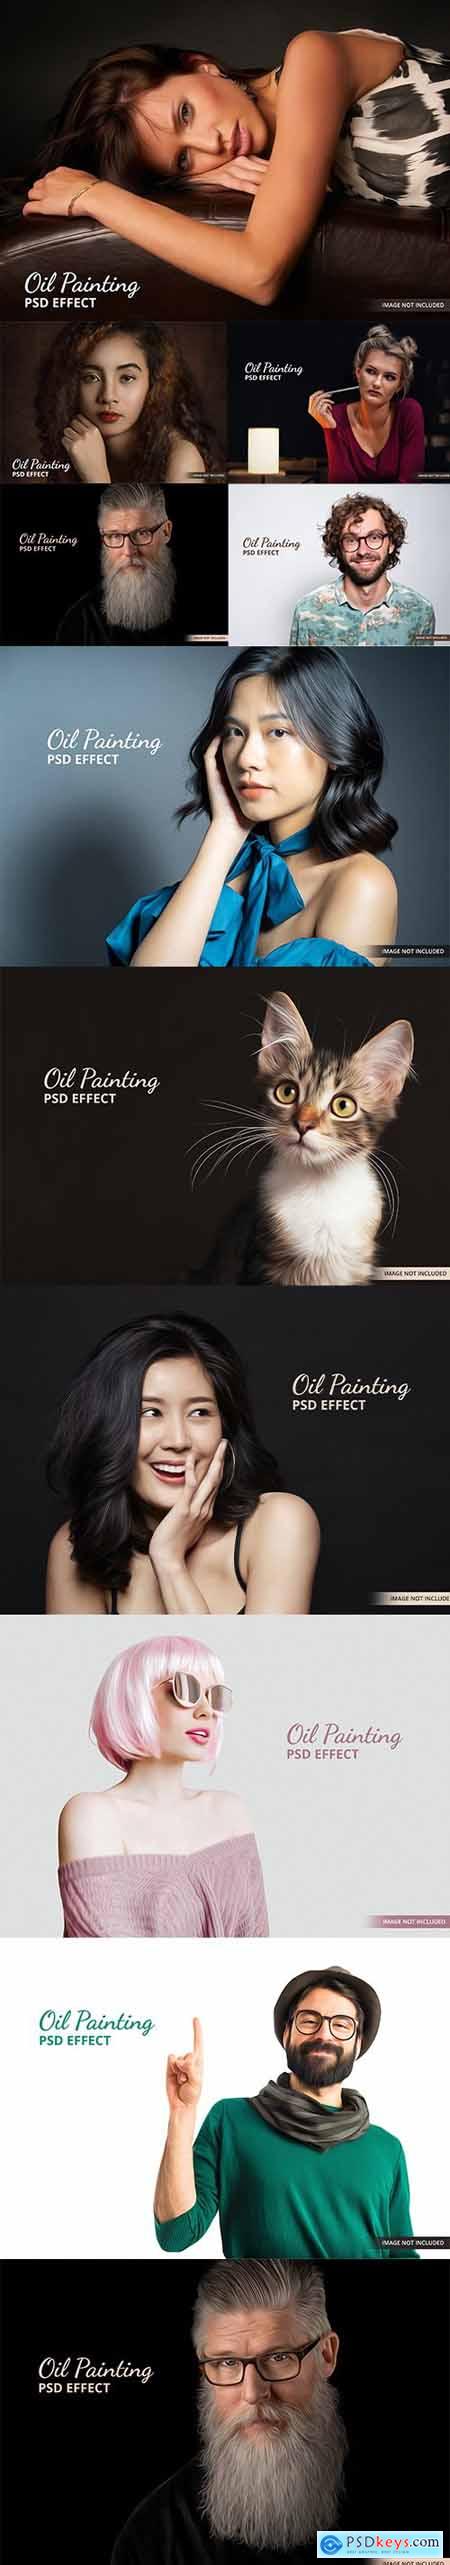 Oil painting effect